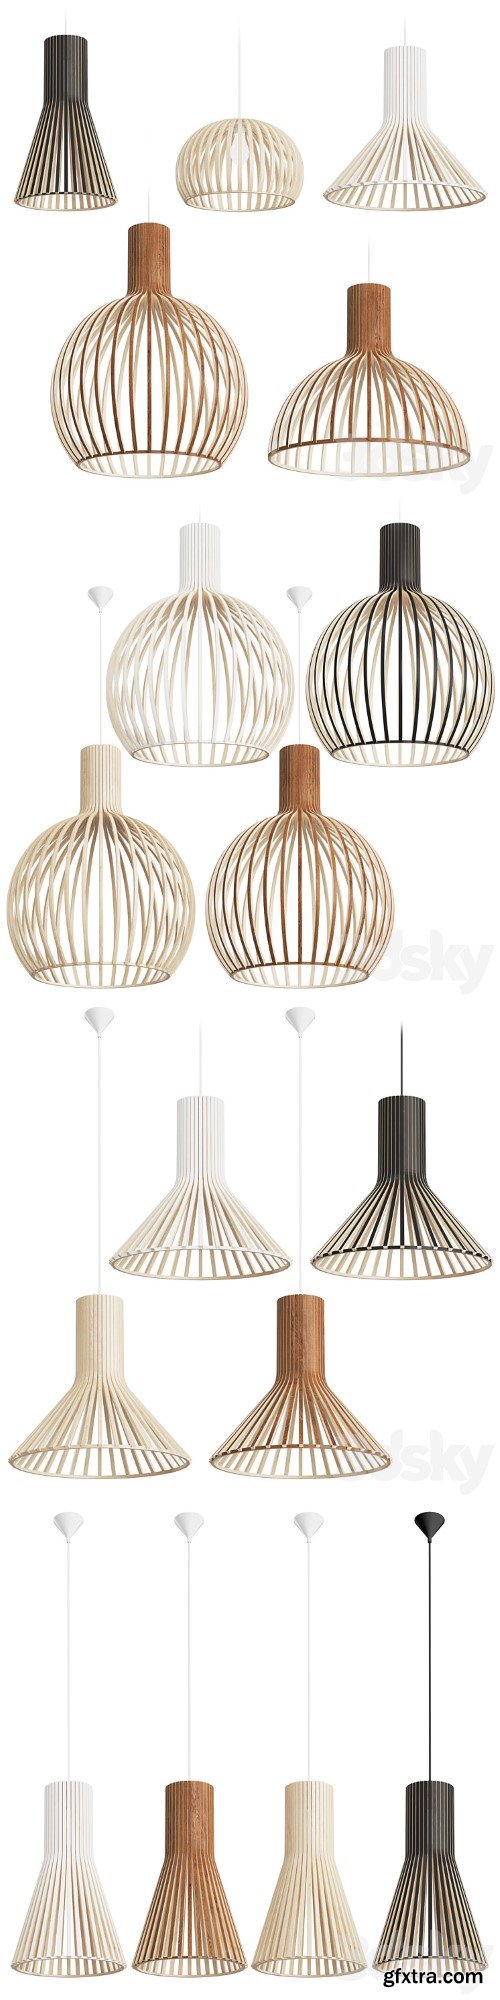 Secto Design Wooden Lamps